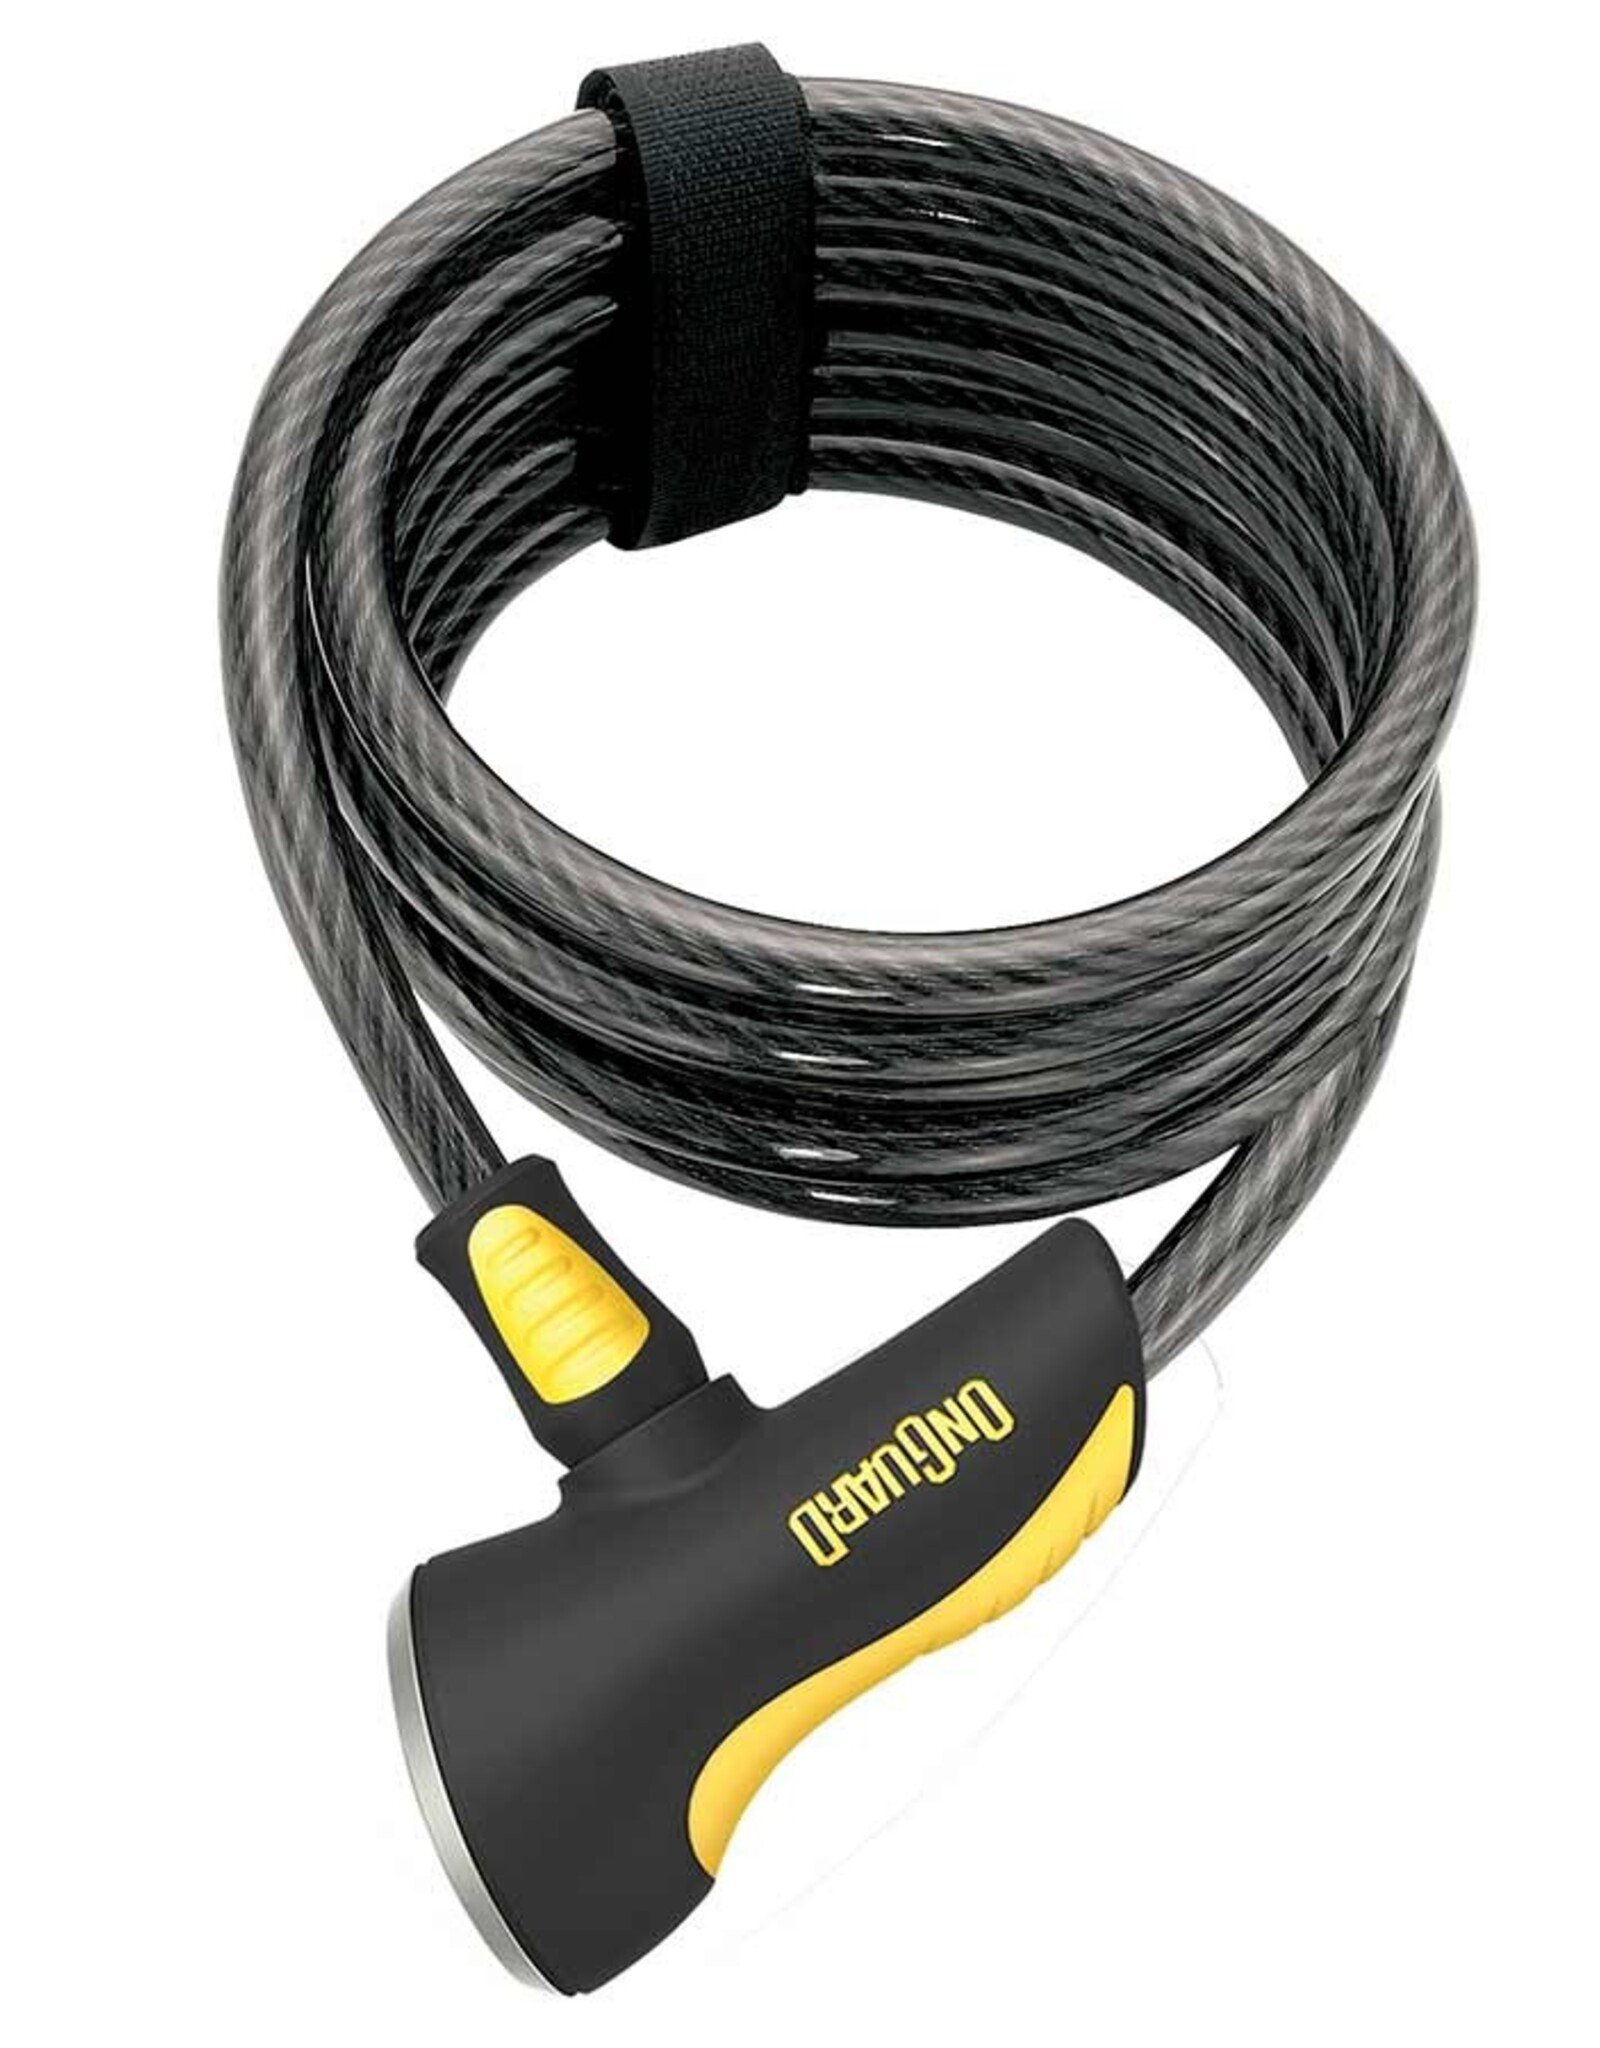 OnGuard, Doberman 8029, Coil cable with key lock, 10mm x 185cm (10mm x 6')